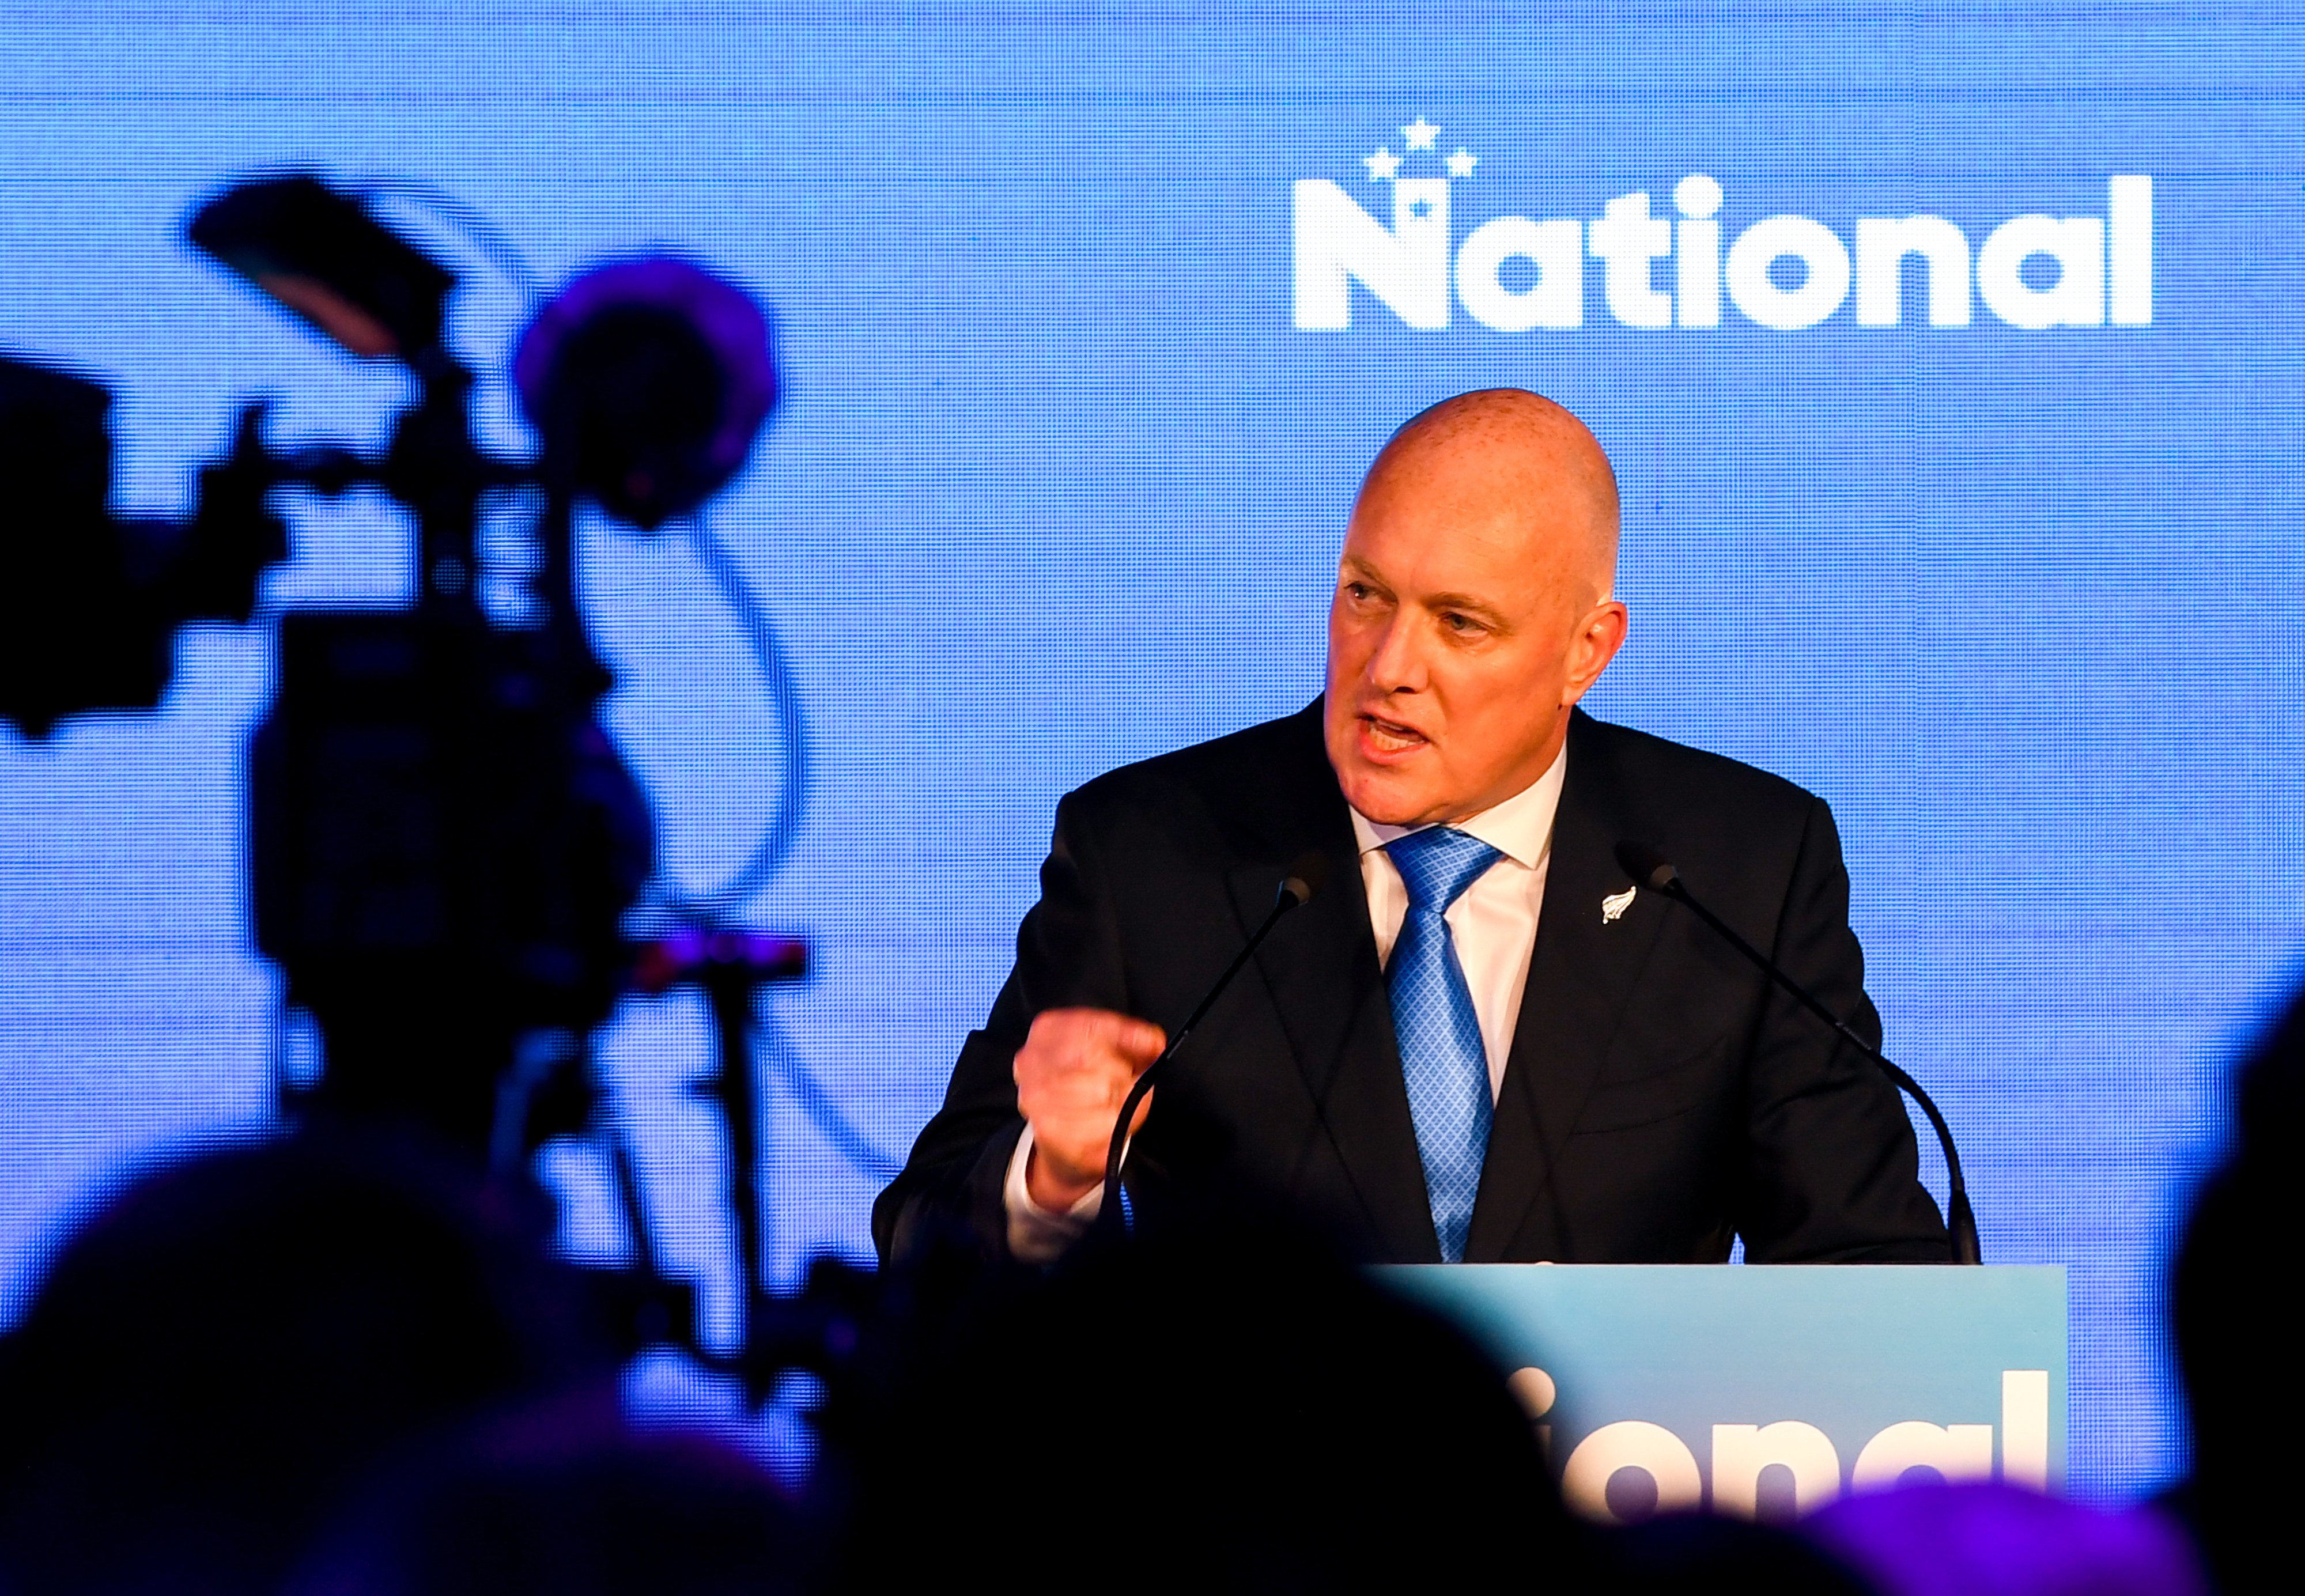 New Zealand’s National Party’s leader Christopher Luxon addresses his supporters in Auckland on October 14. Photo: Xinhua